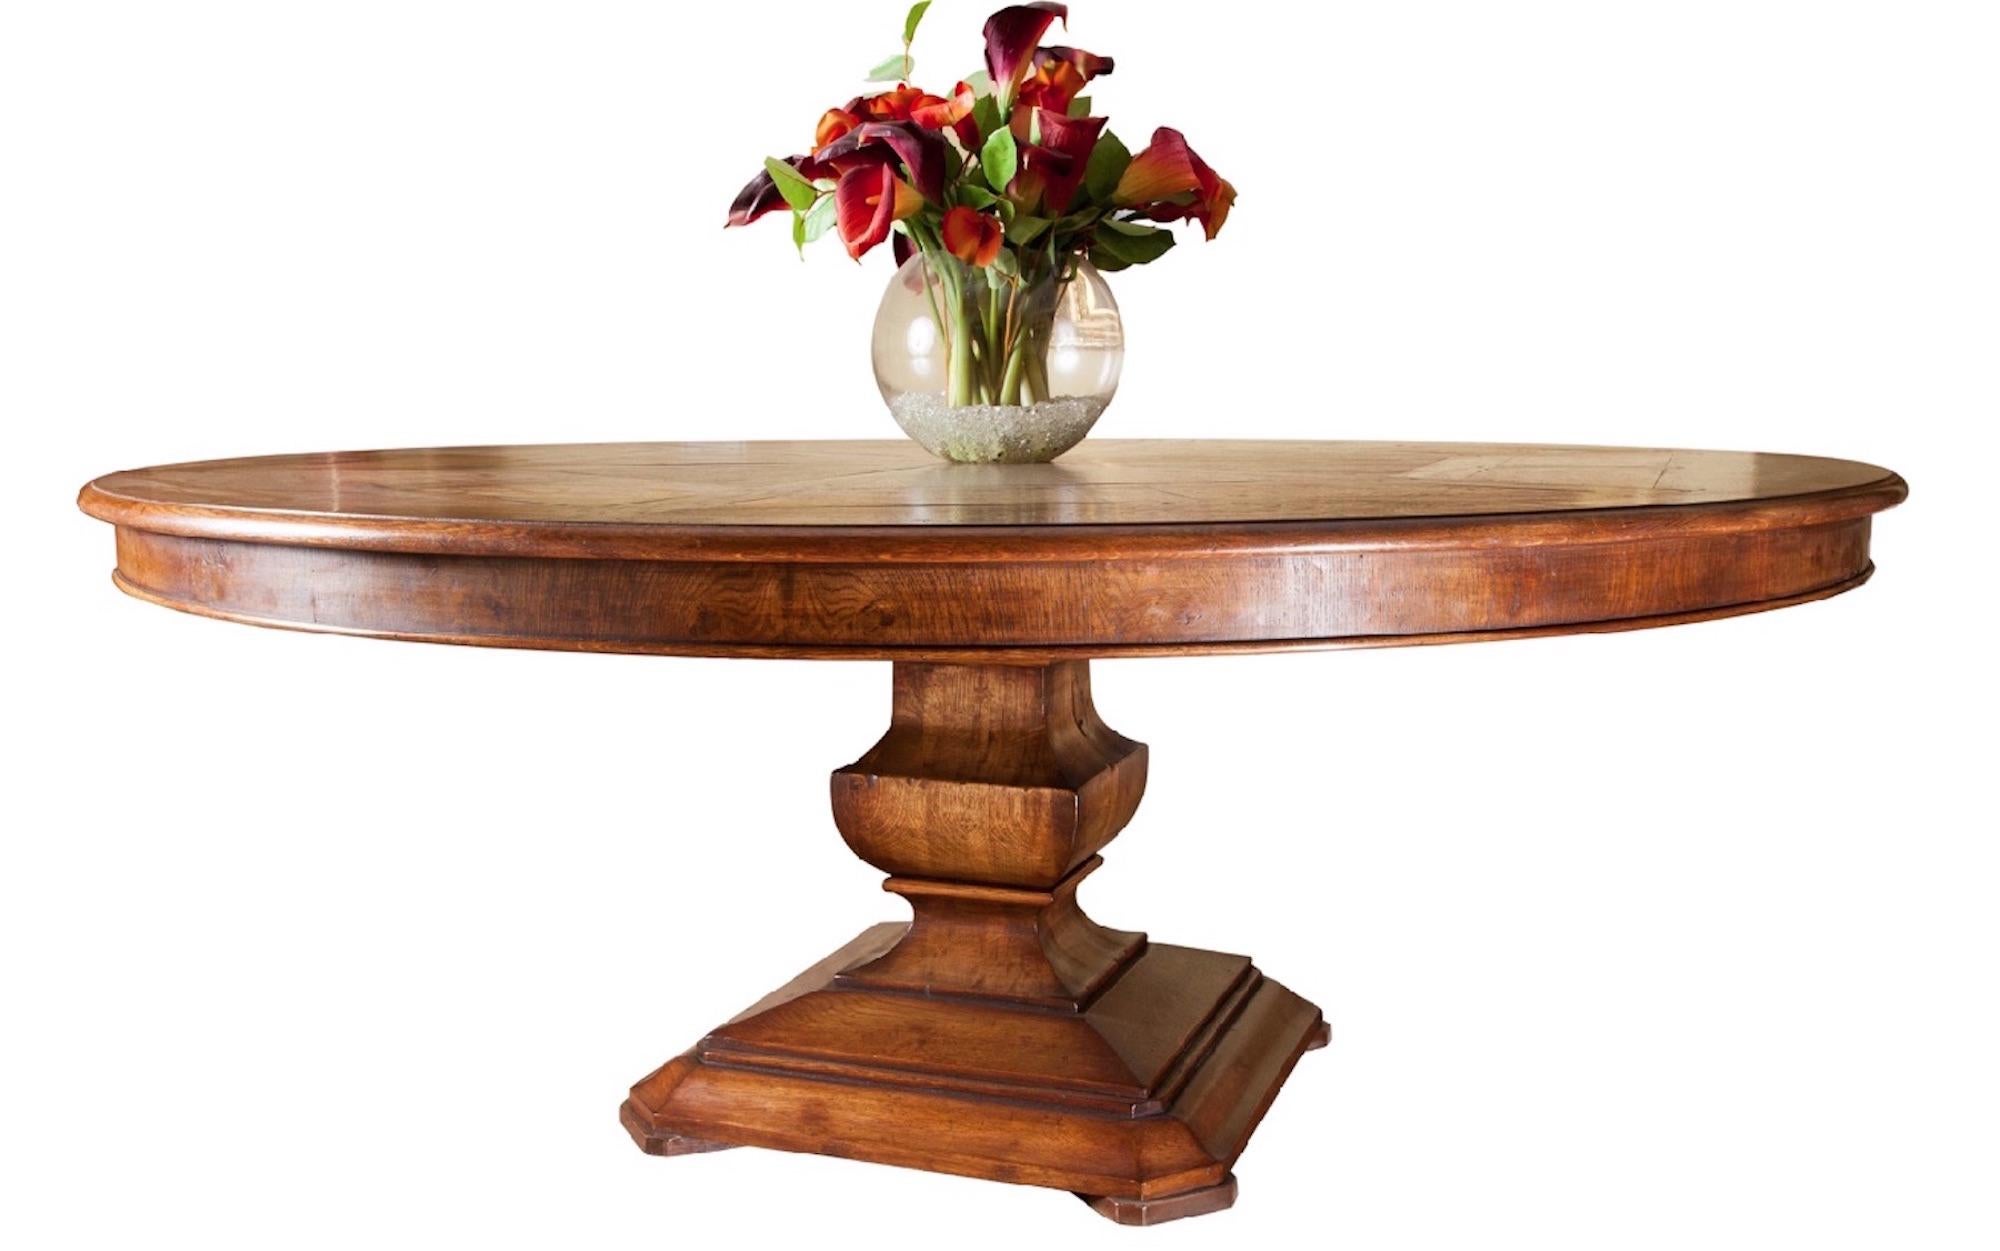 Fabulous Handmade circular dining table, superb quality (made in the UK). 
The hexagonal segmented oak and burr oak panelled top sits on a contemporary platform column base. Seats 8/10. 
Table shown : Semi Rustic finish & Antique Straw Colour gives